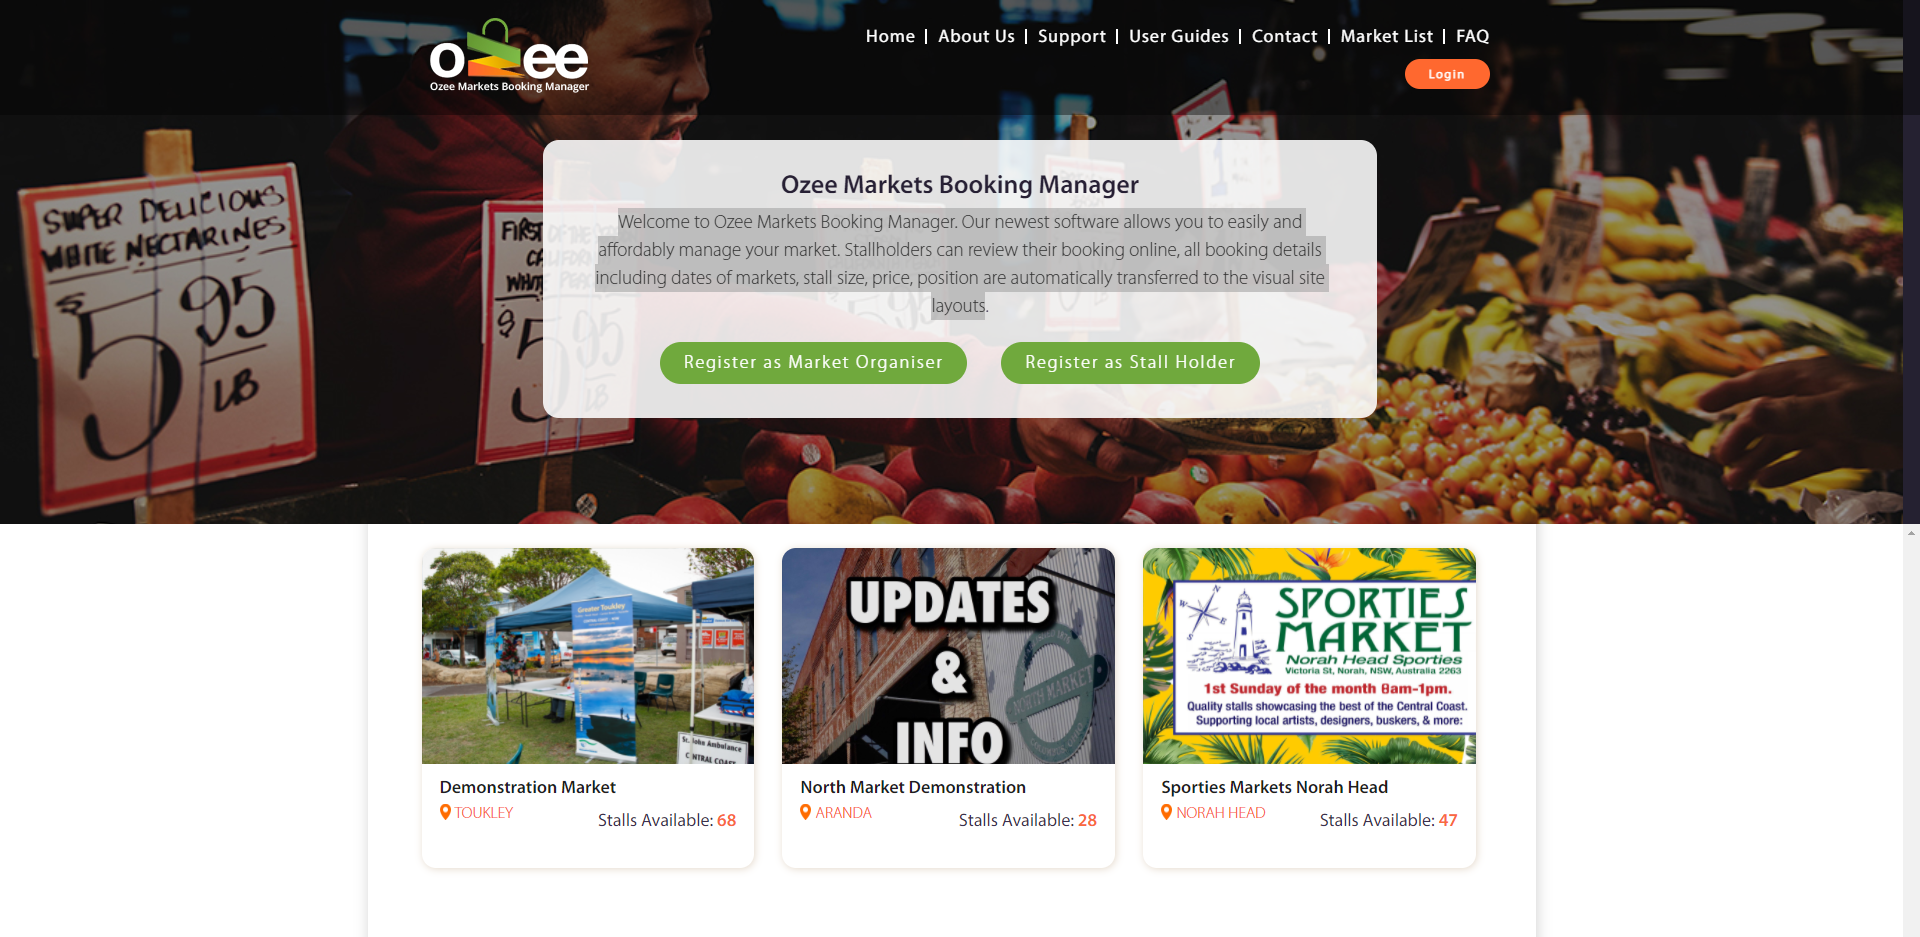 Welcome to Ozee Markets Booking Manager!